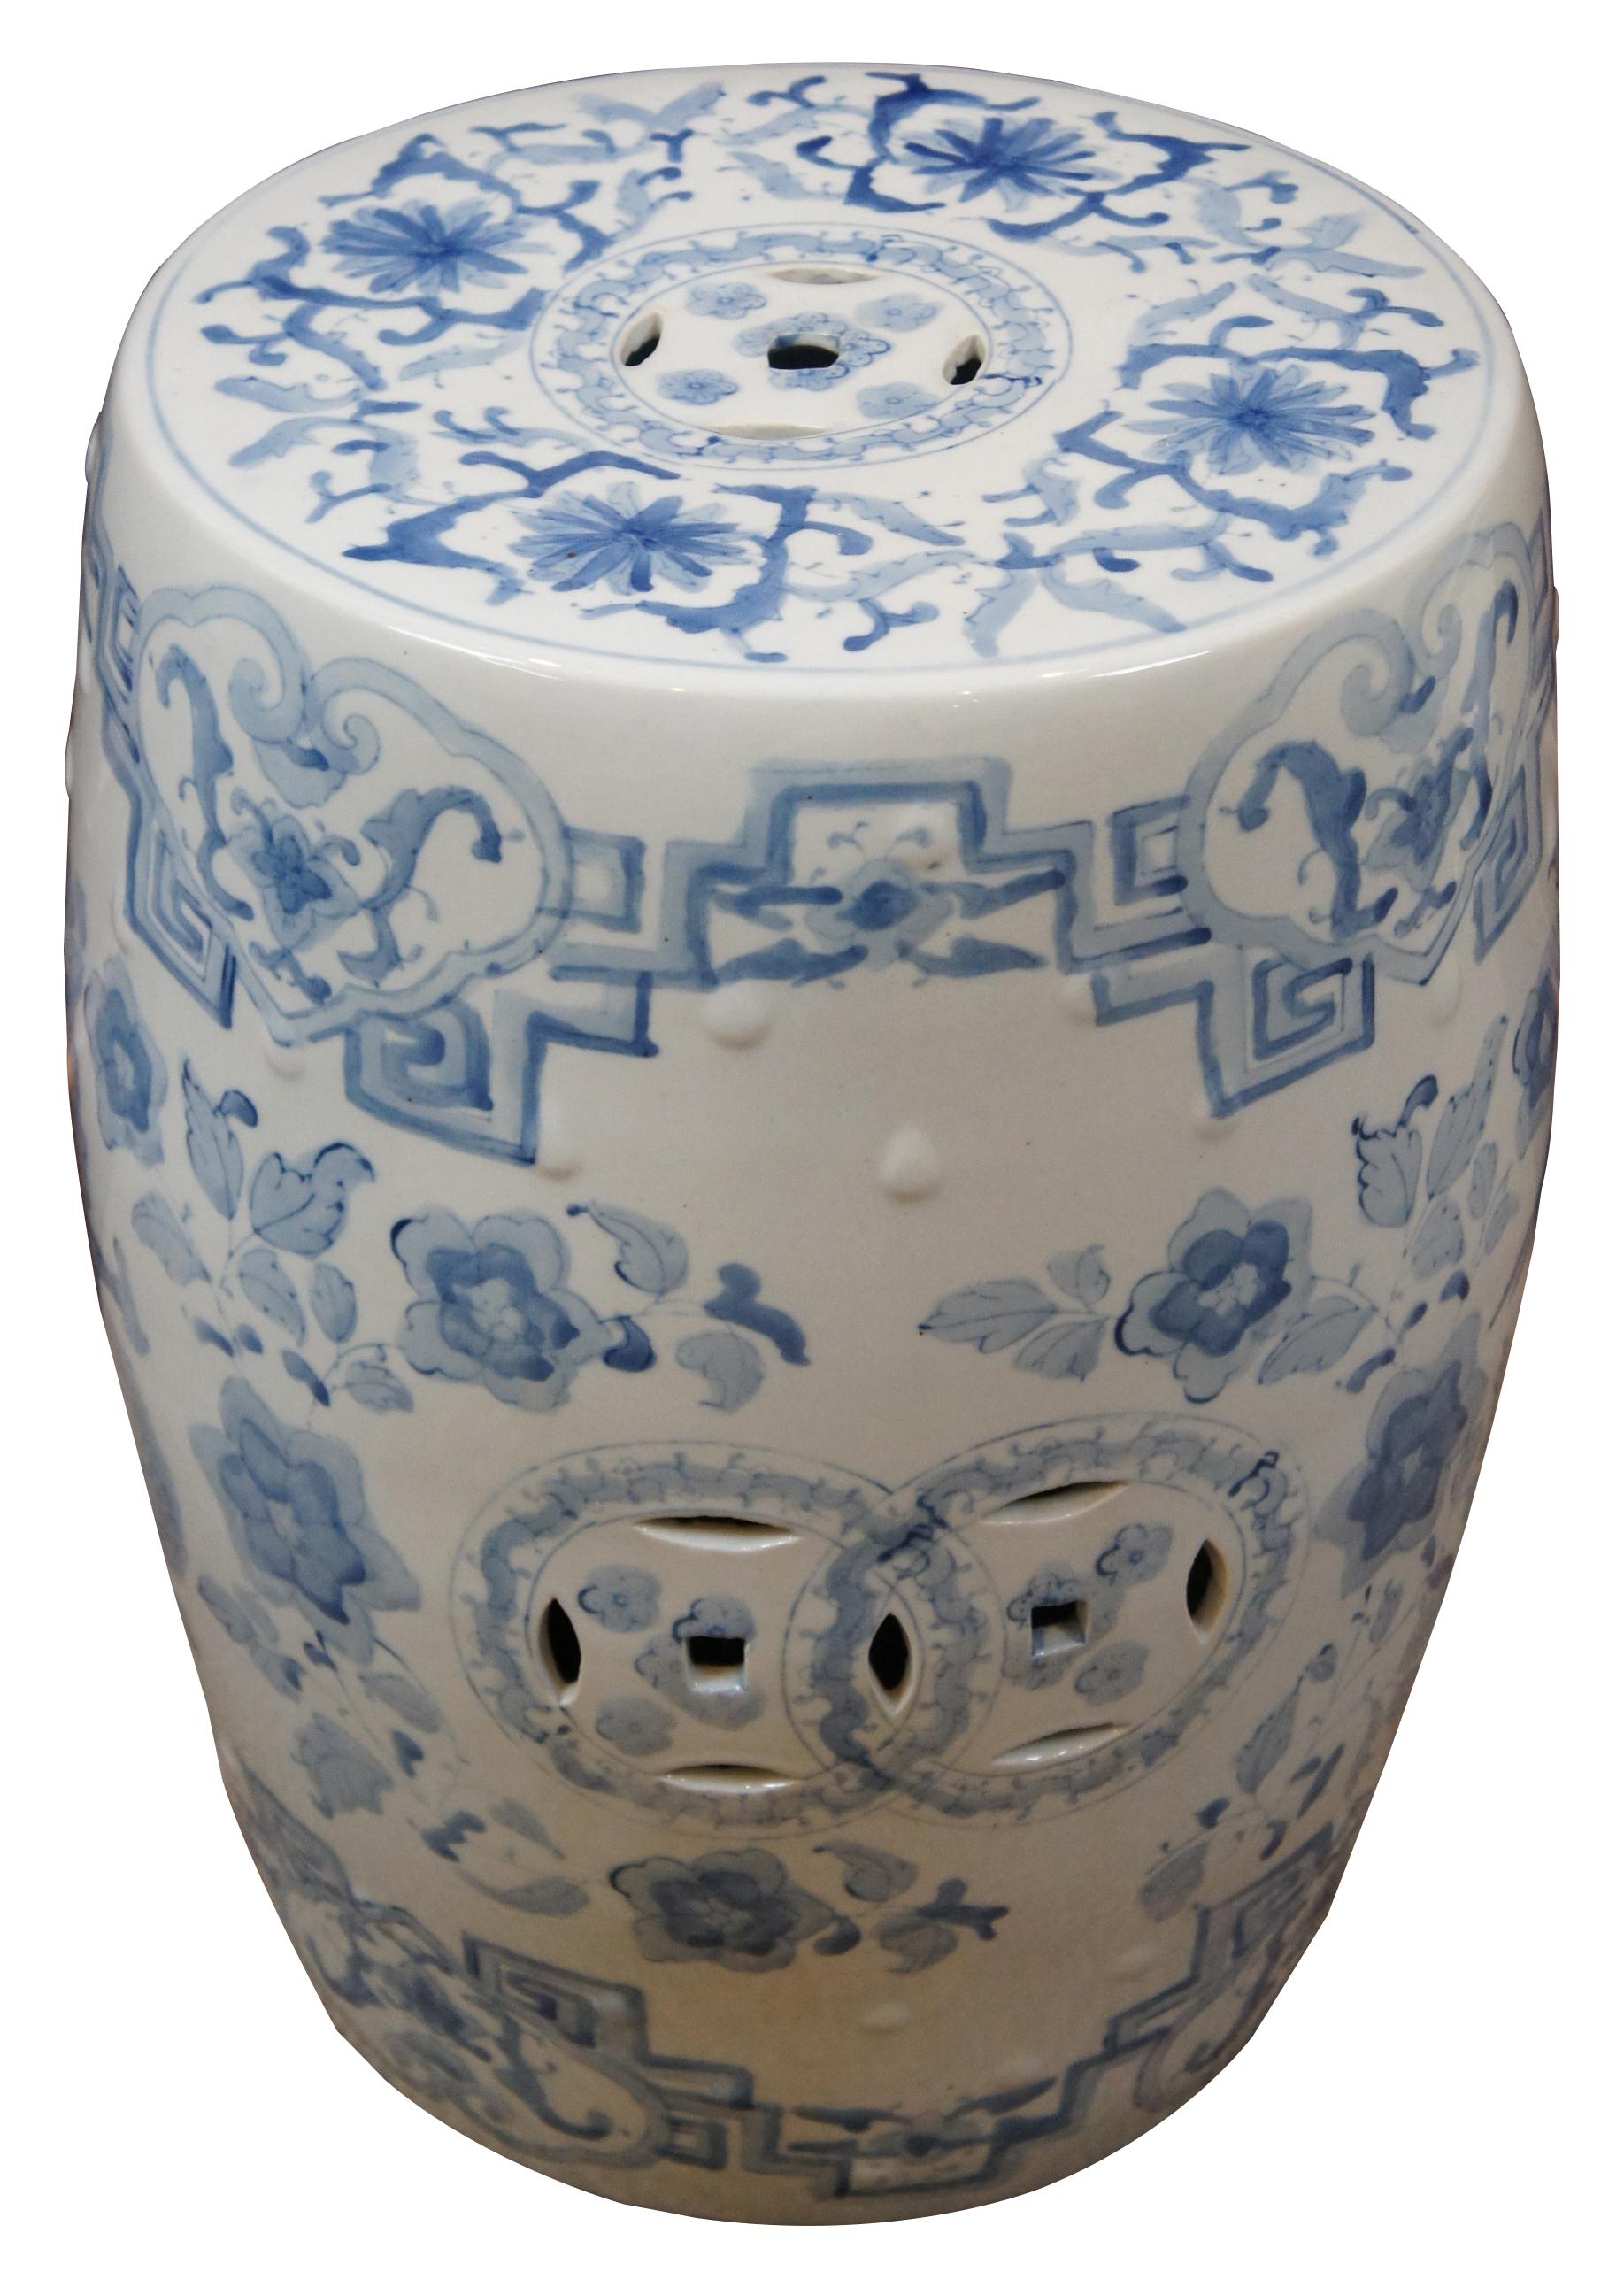 Antique blue and white reticulated floral Chinese porcelain / ceramic garden stool, plant stand or side table featuring a Phoenix / rooster and serpent / dragon surrounded by flowers.
  